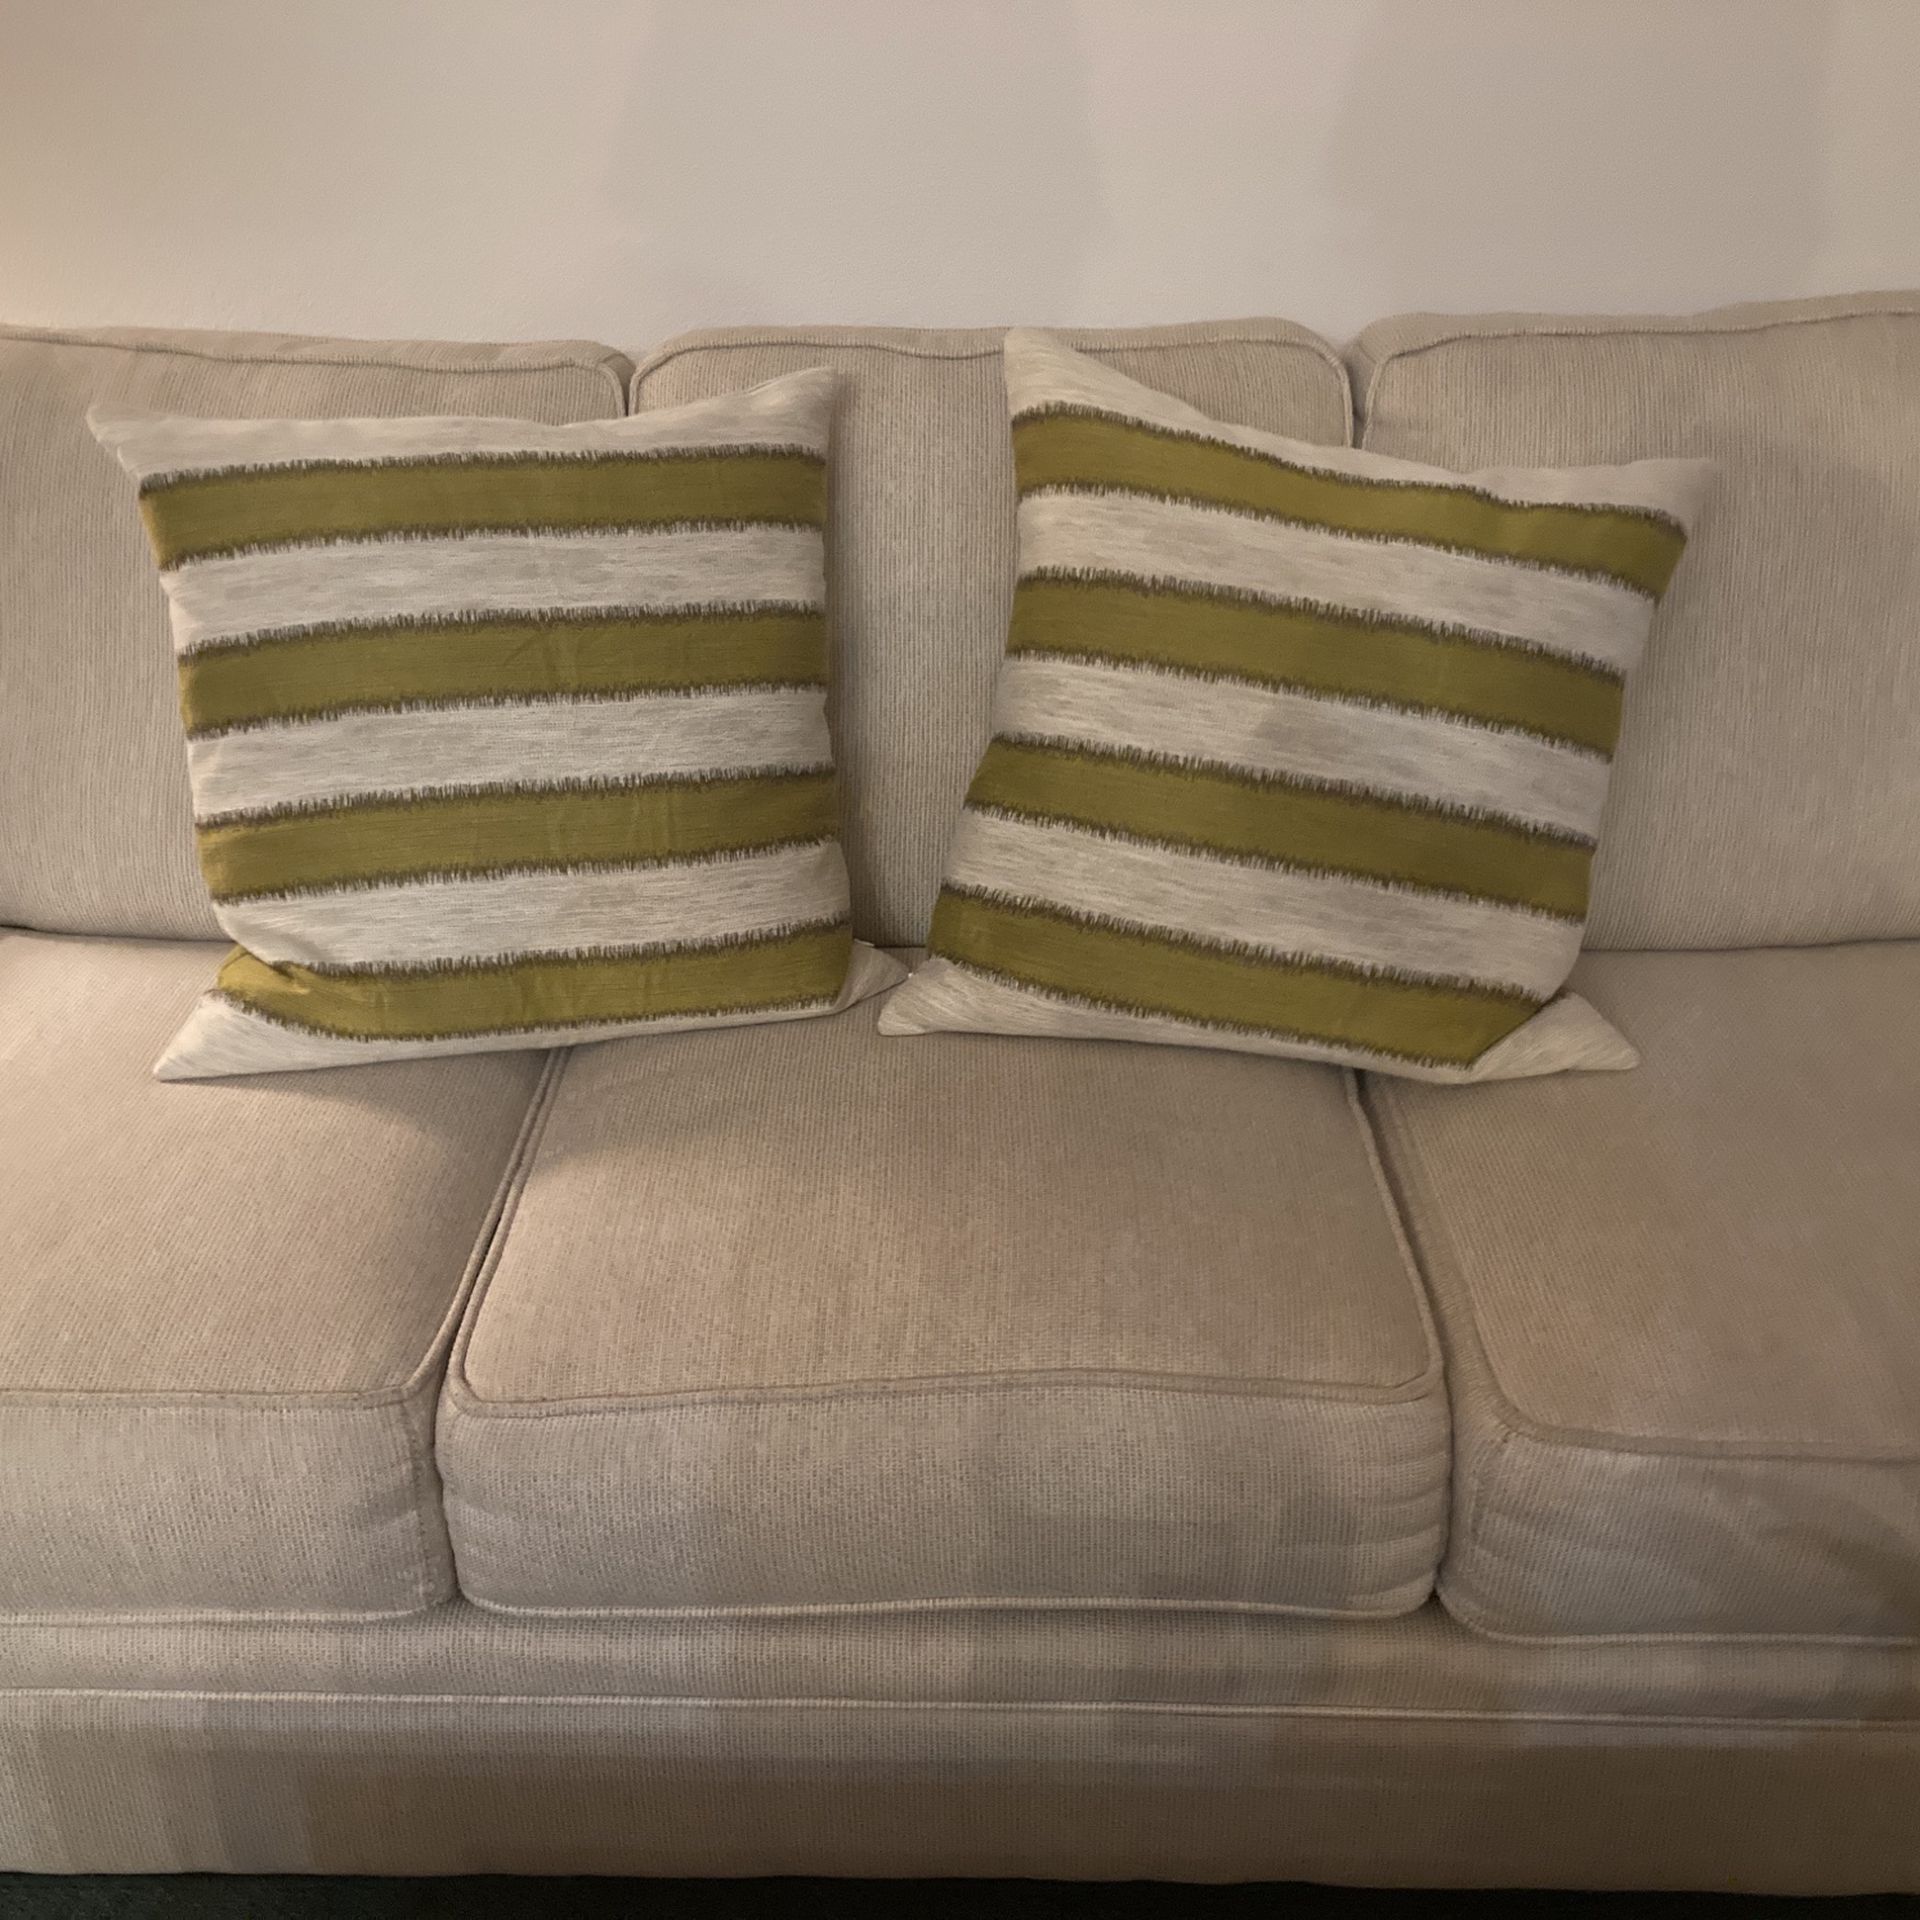 Set of two 18” decorative pillows.